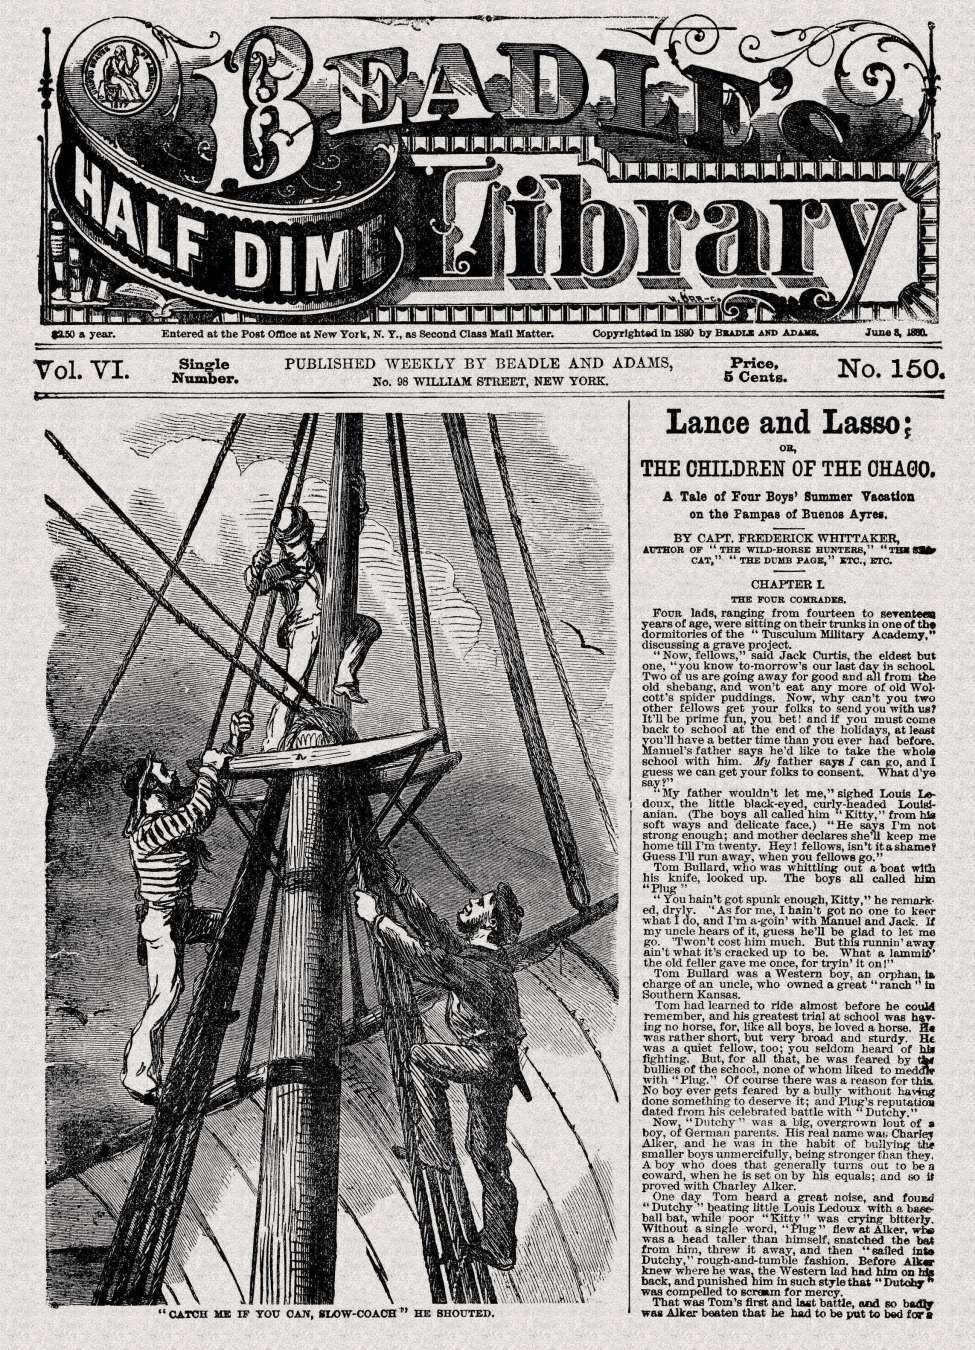 Comic Book Cover For Beadle's Half Dime Library 150 - Lance and Lasso